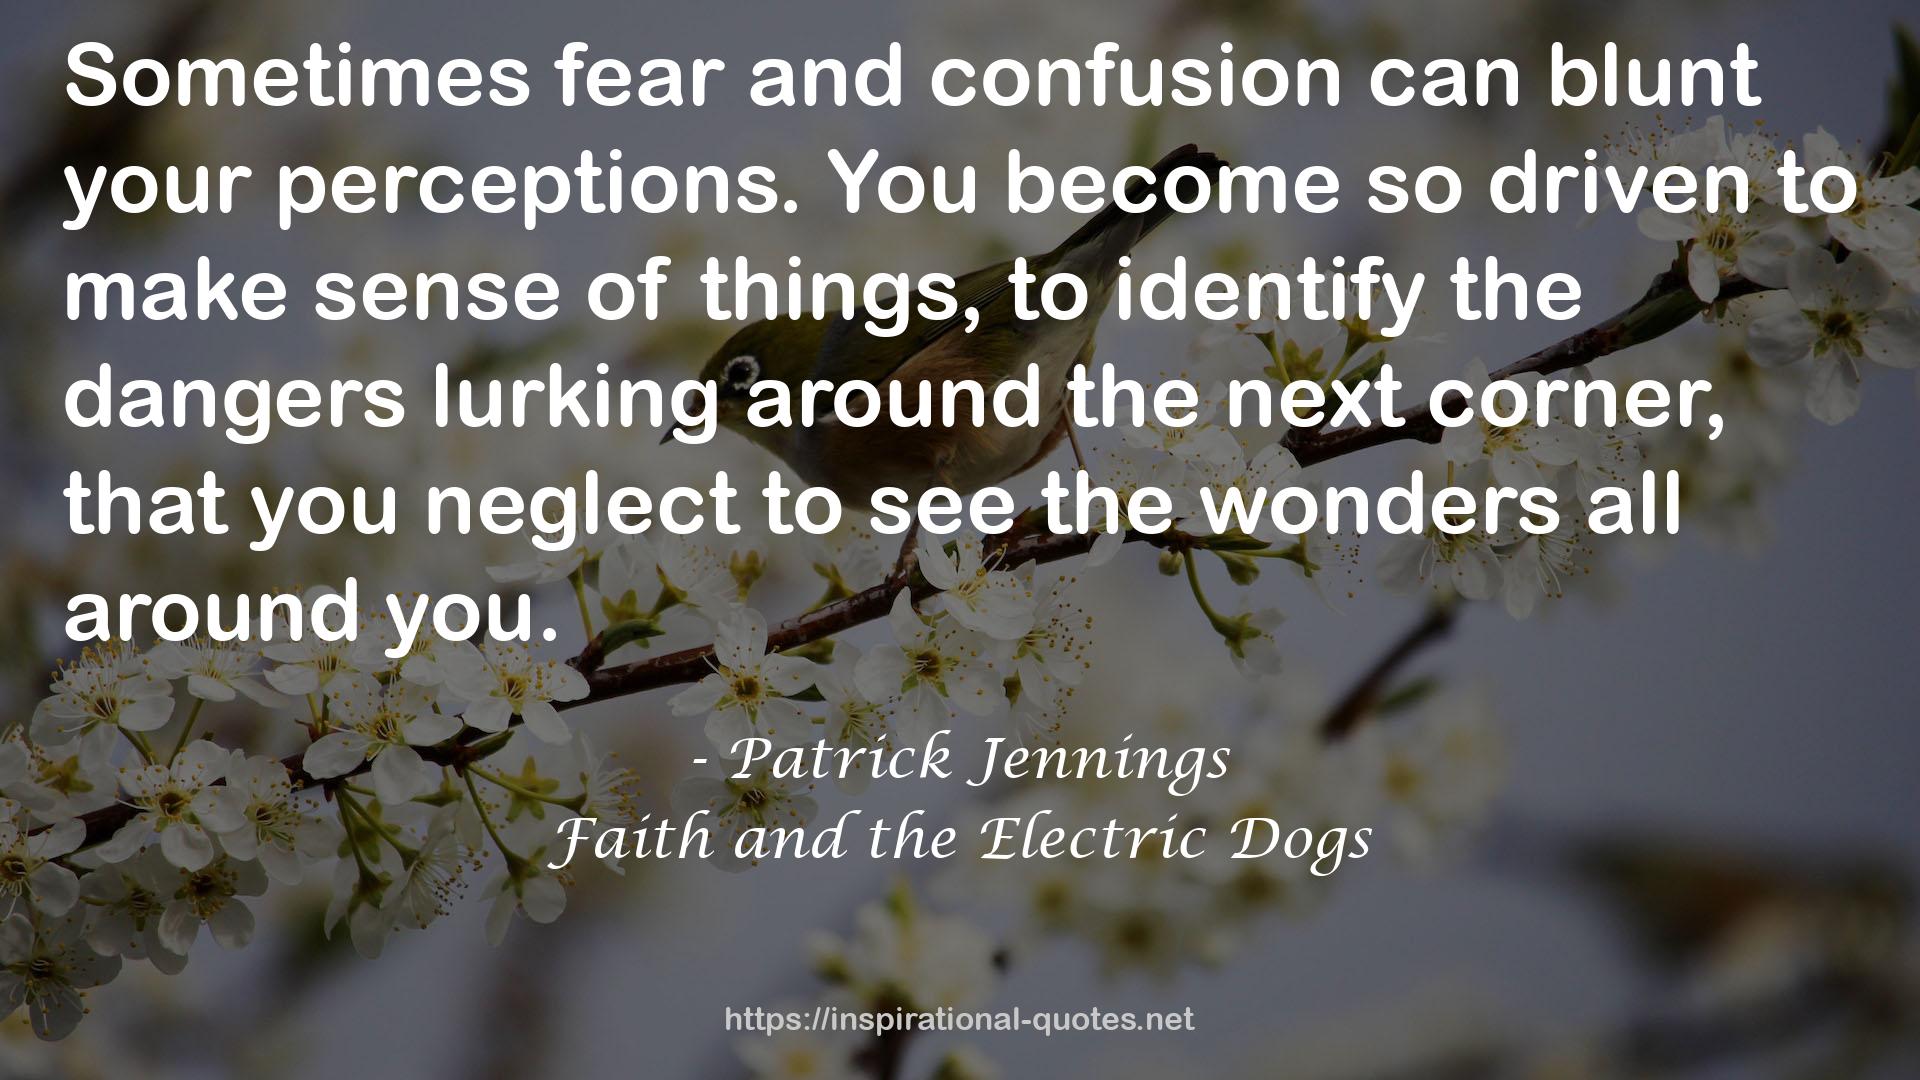 Faith and the Electric Dogs QUOTES